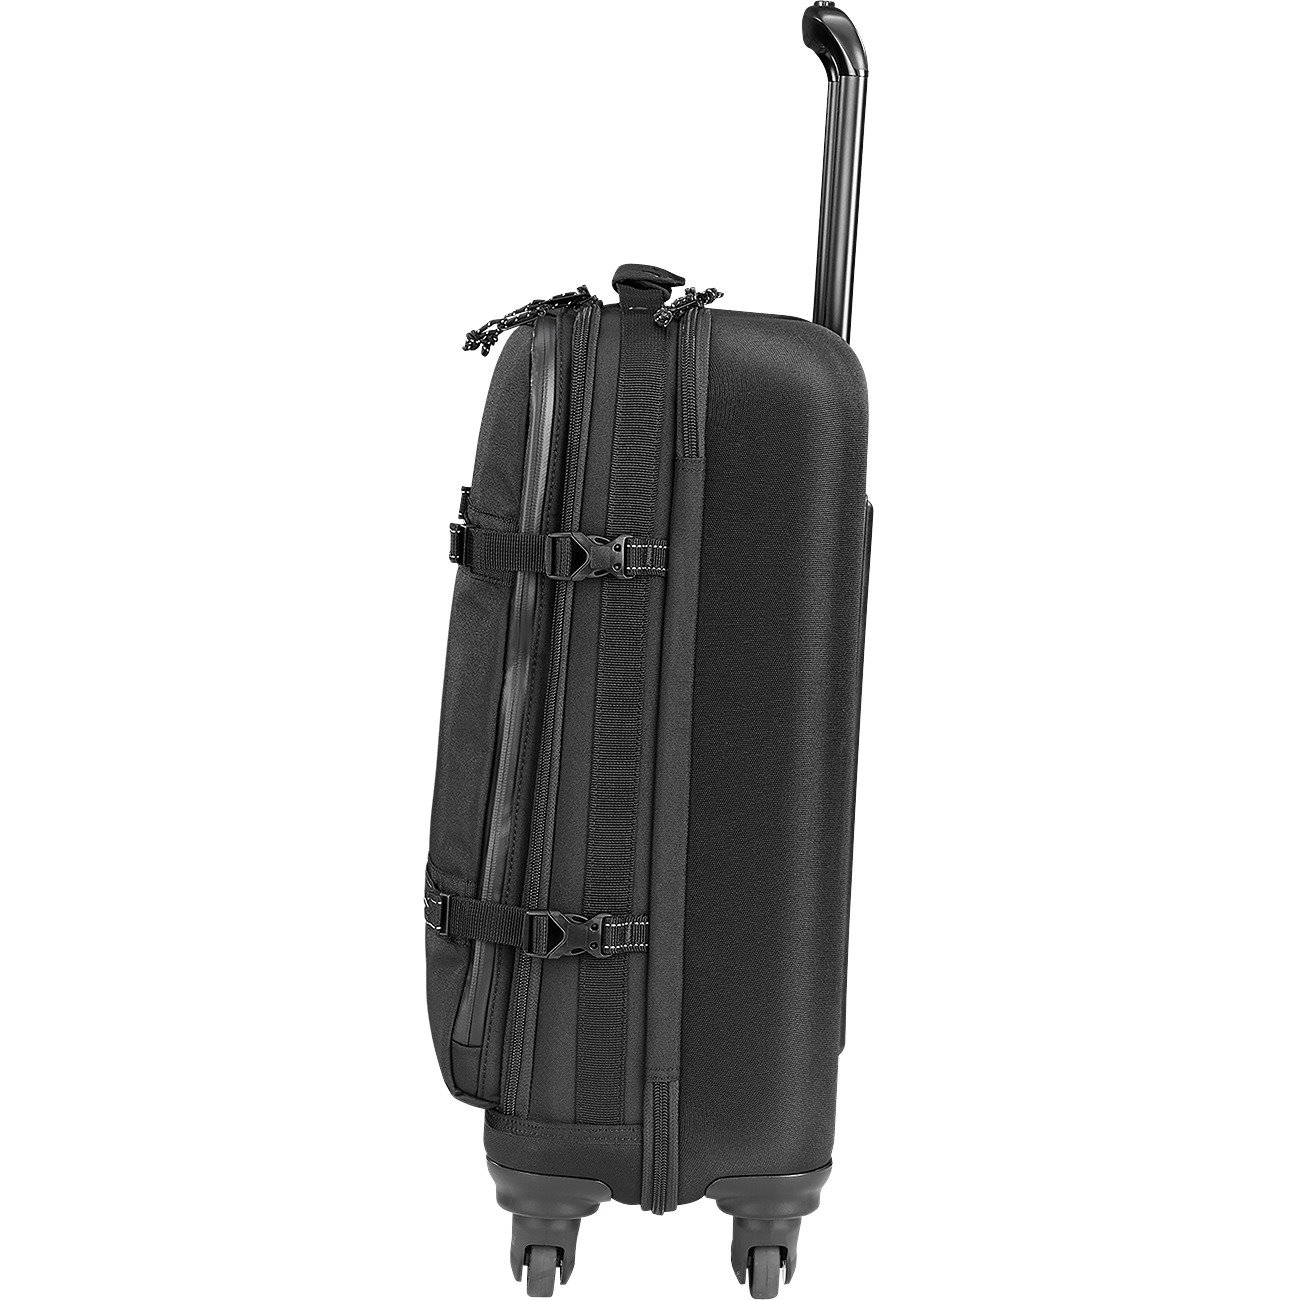 Ogio ALPHA Convoy 520S Travel/Luggage Case (Carry On) for 15" Travel Essential - Black